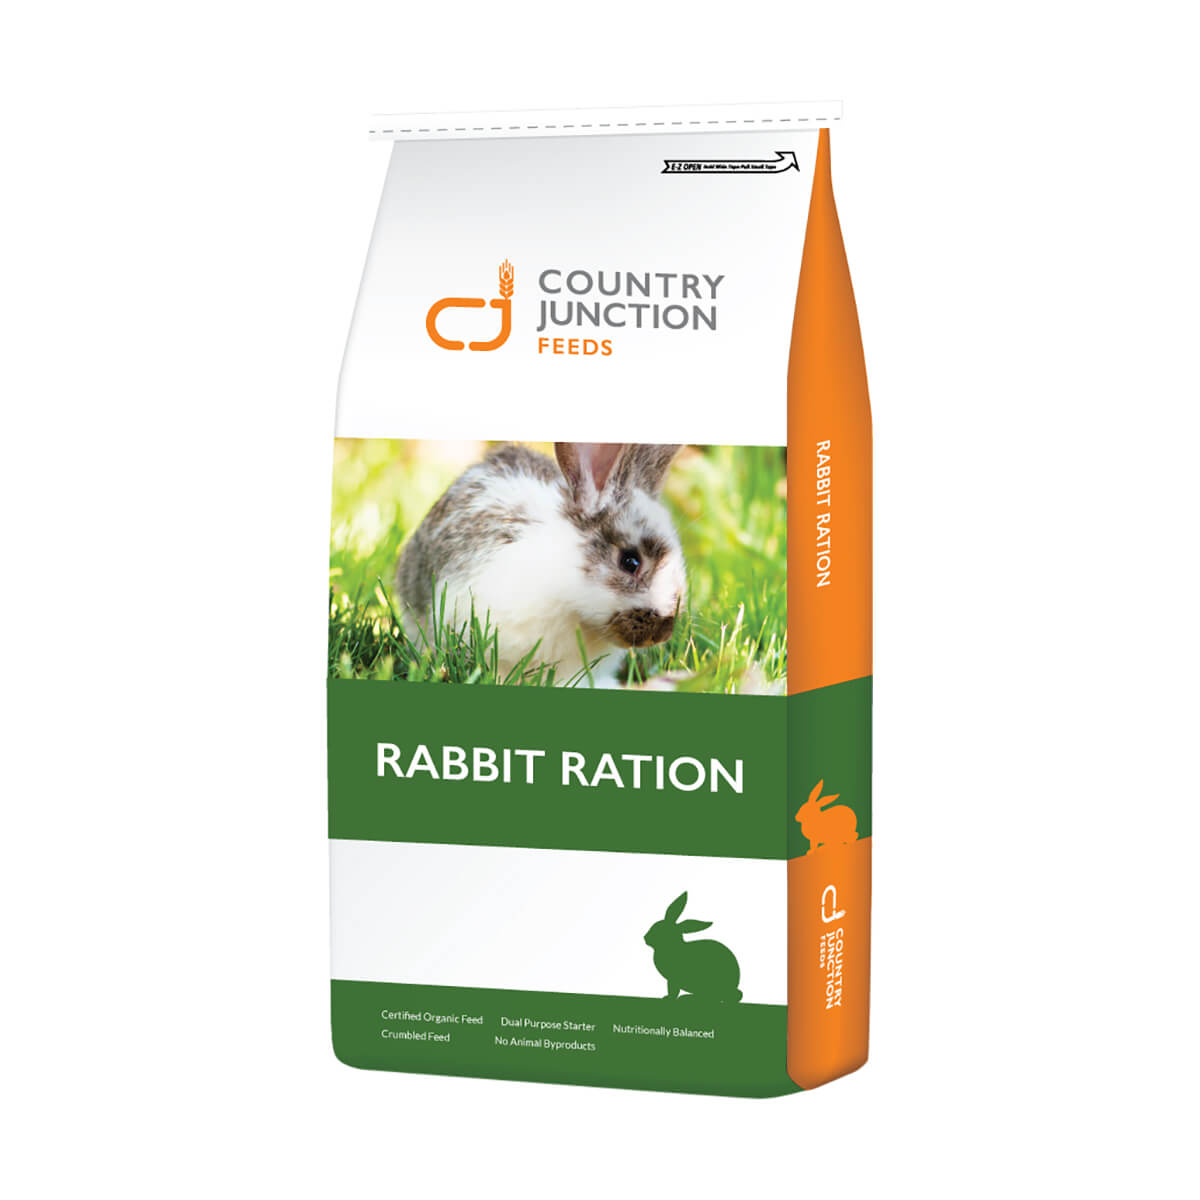 Rabbit Ration - Country Junction 16% - 20 kg